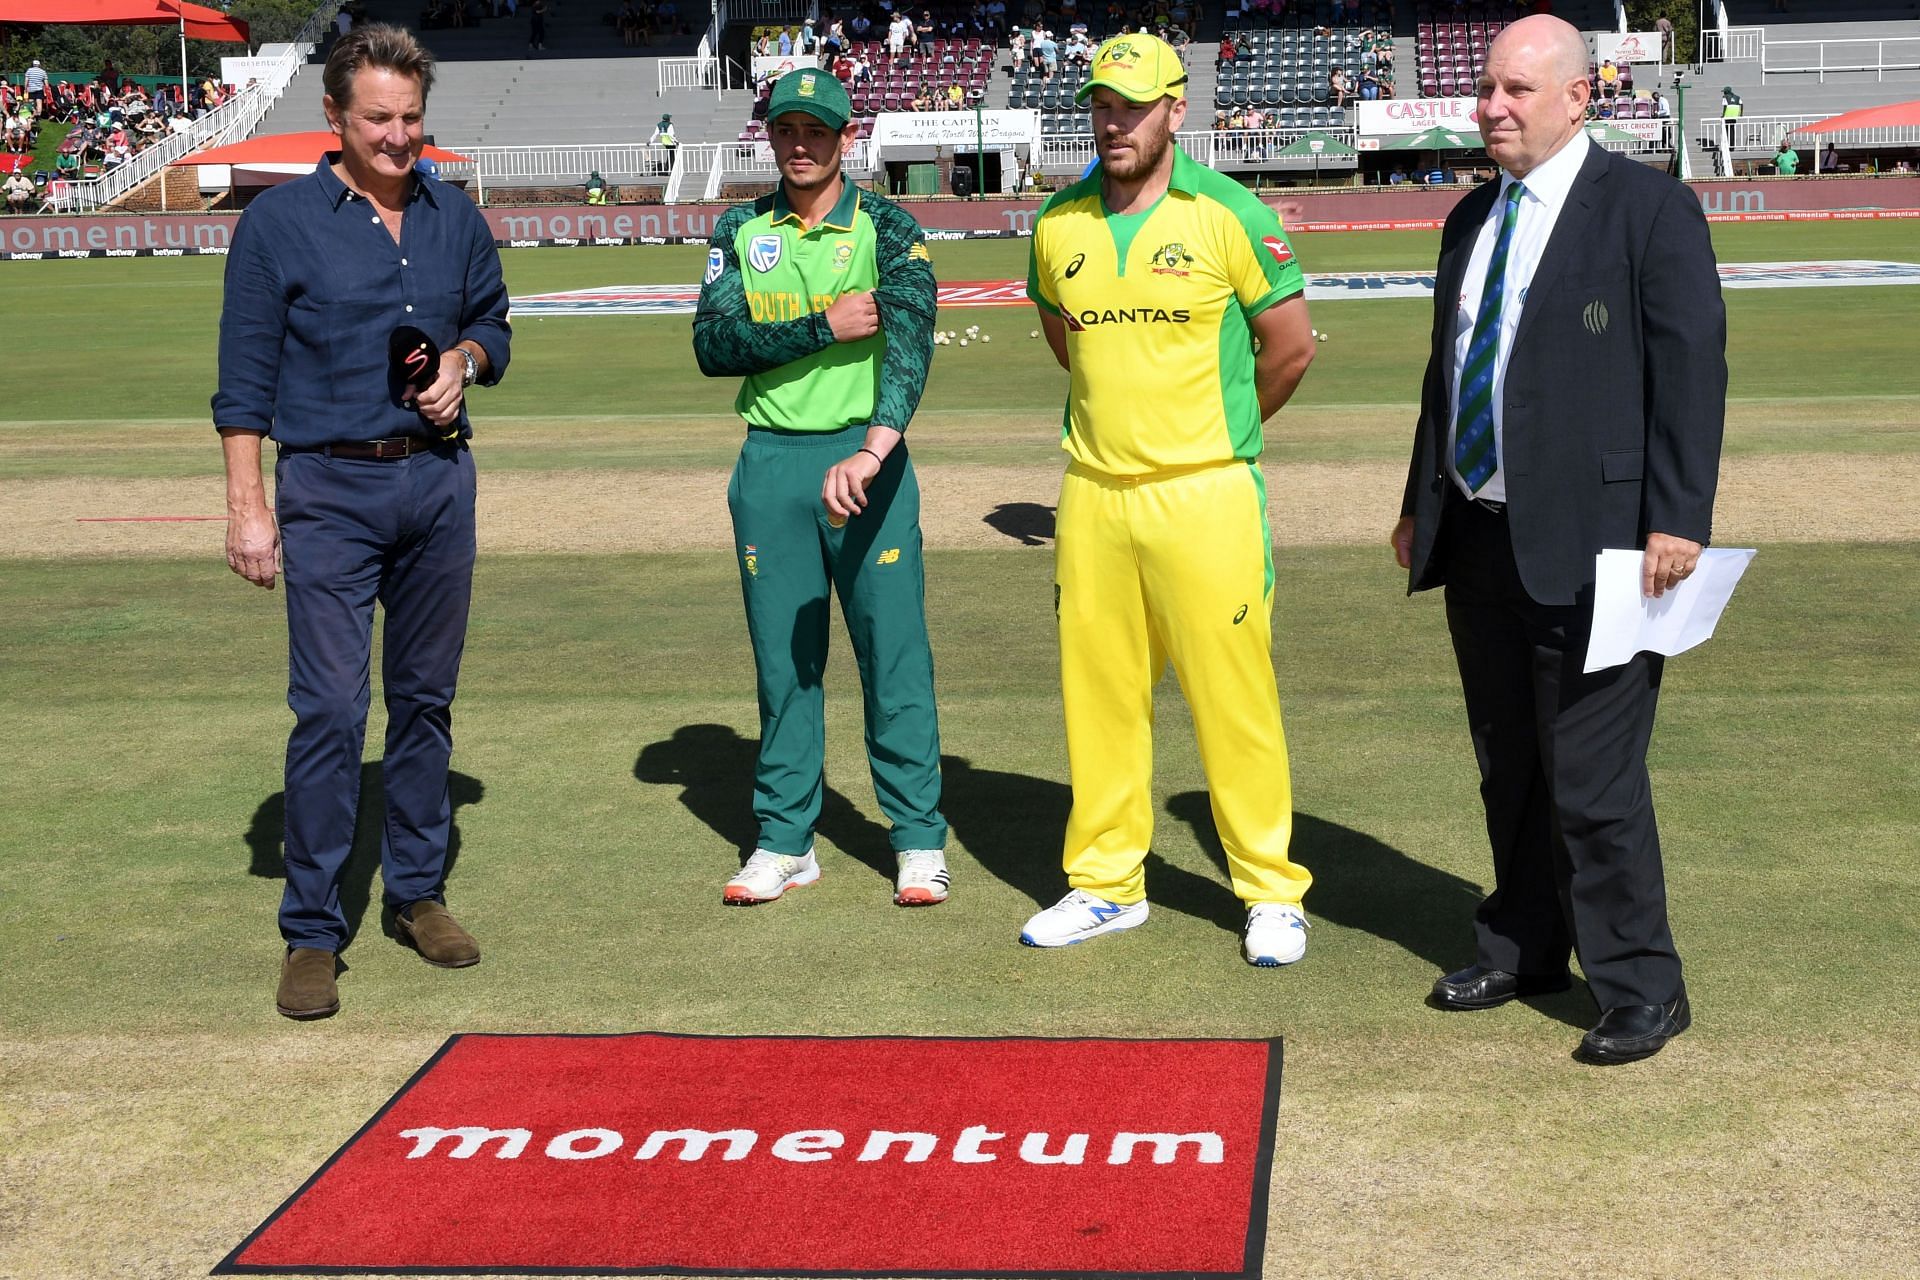 South Africa and Australia will face off in the opening fixture of Super 12 at the Sheikh Zayed Stadium